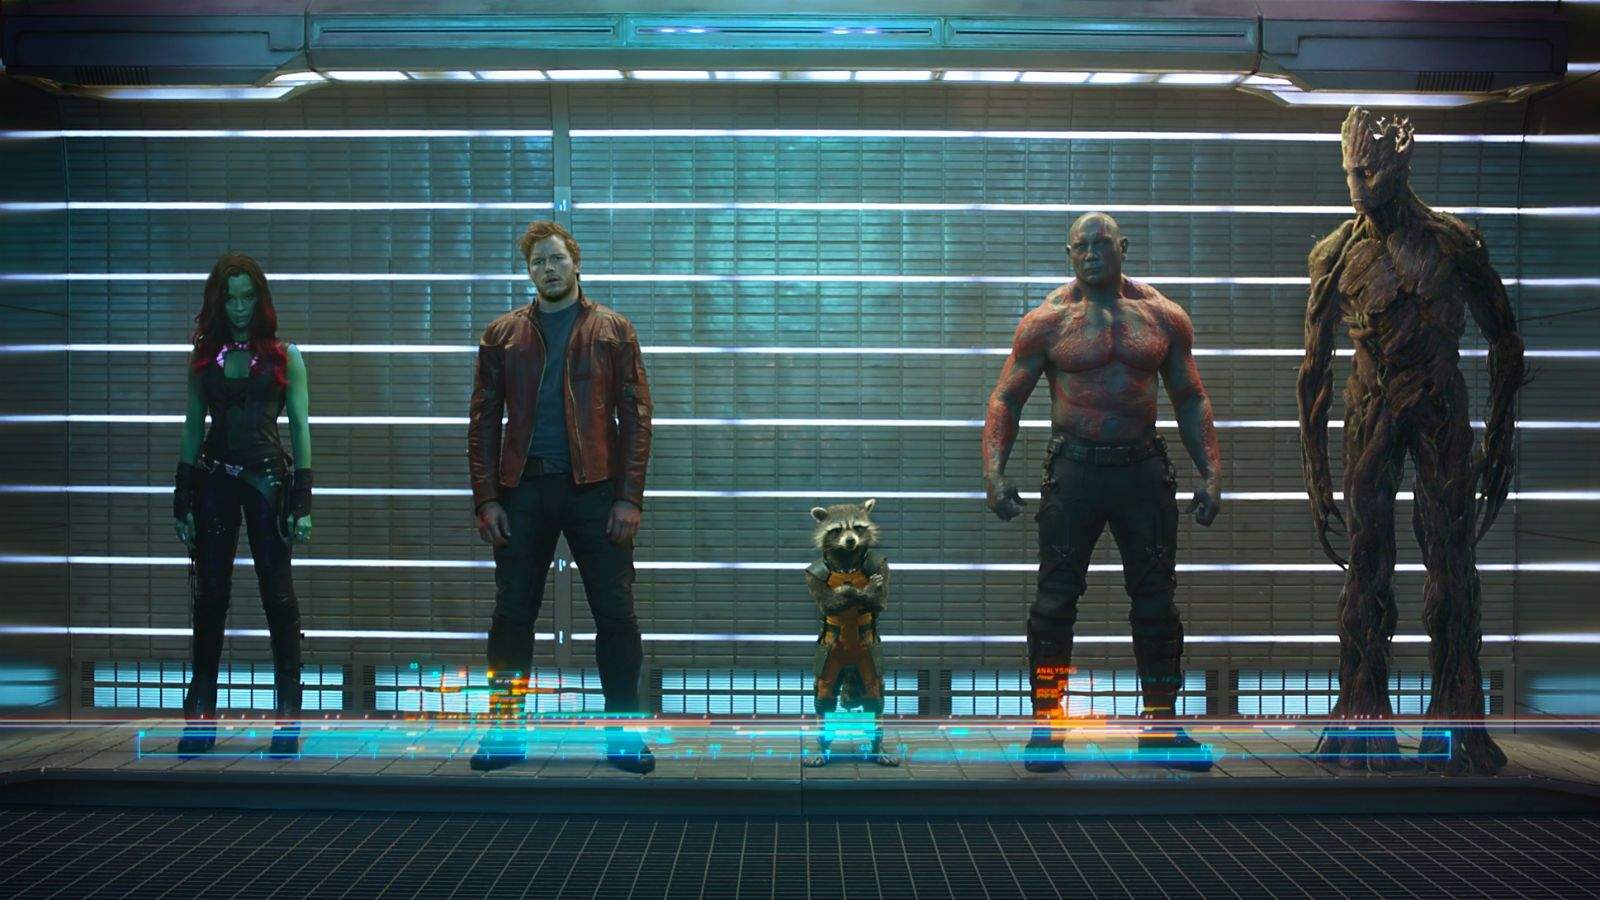 With Guardians of the Galaxy, Marvel Studios is spinning its movie empire forward into the future. Image courtesy Marvel Studios